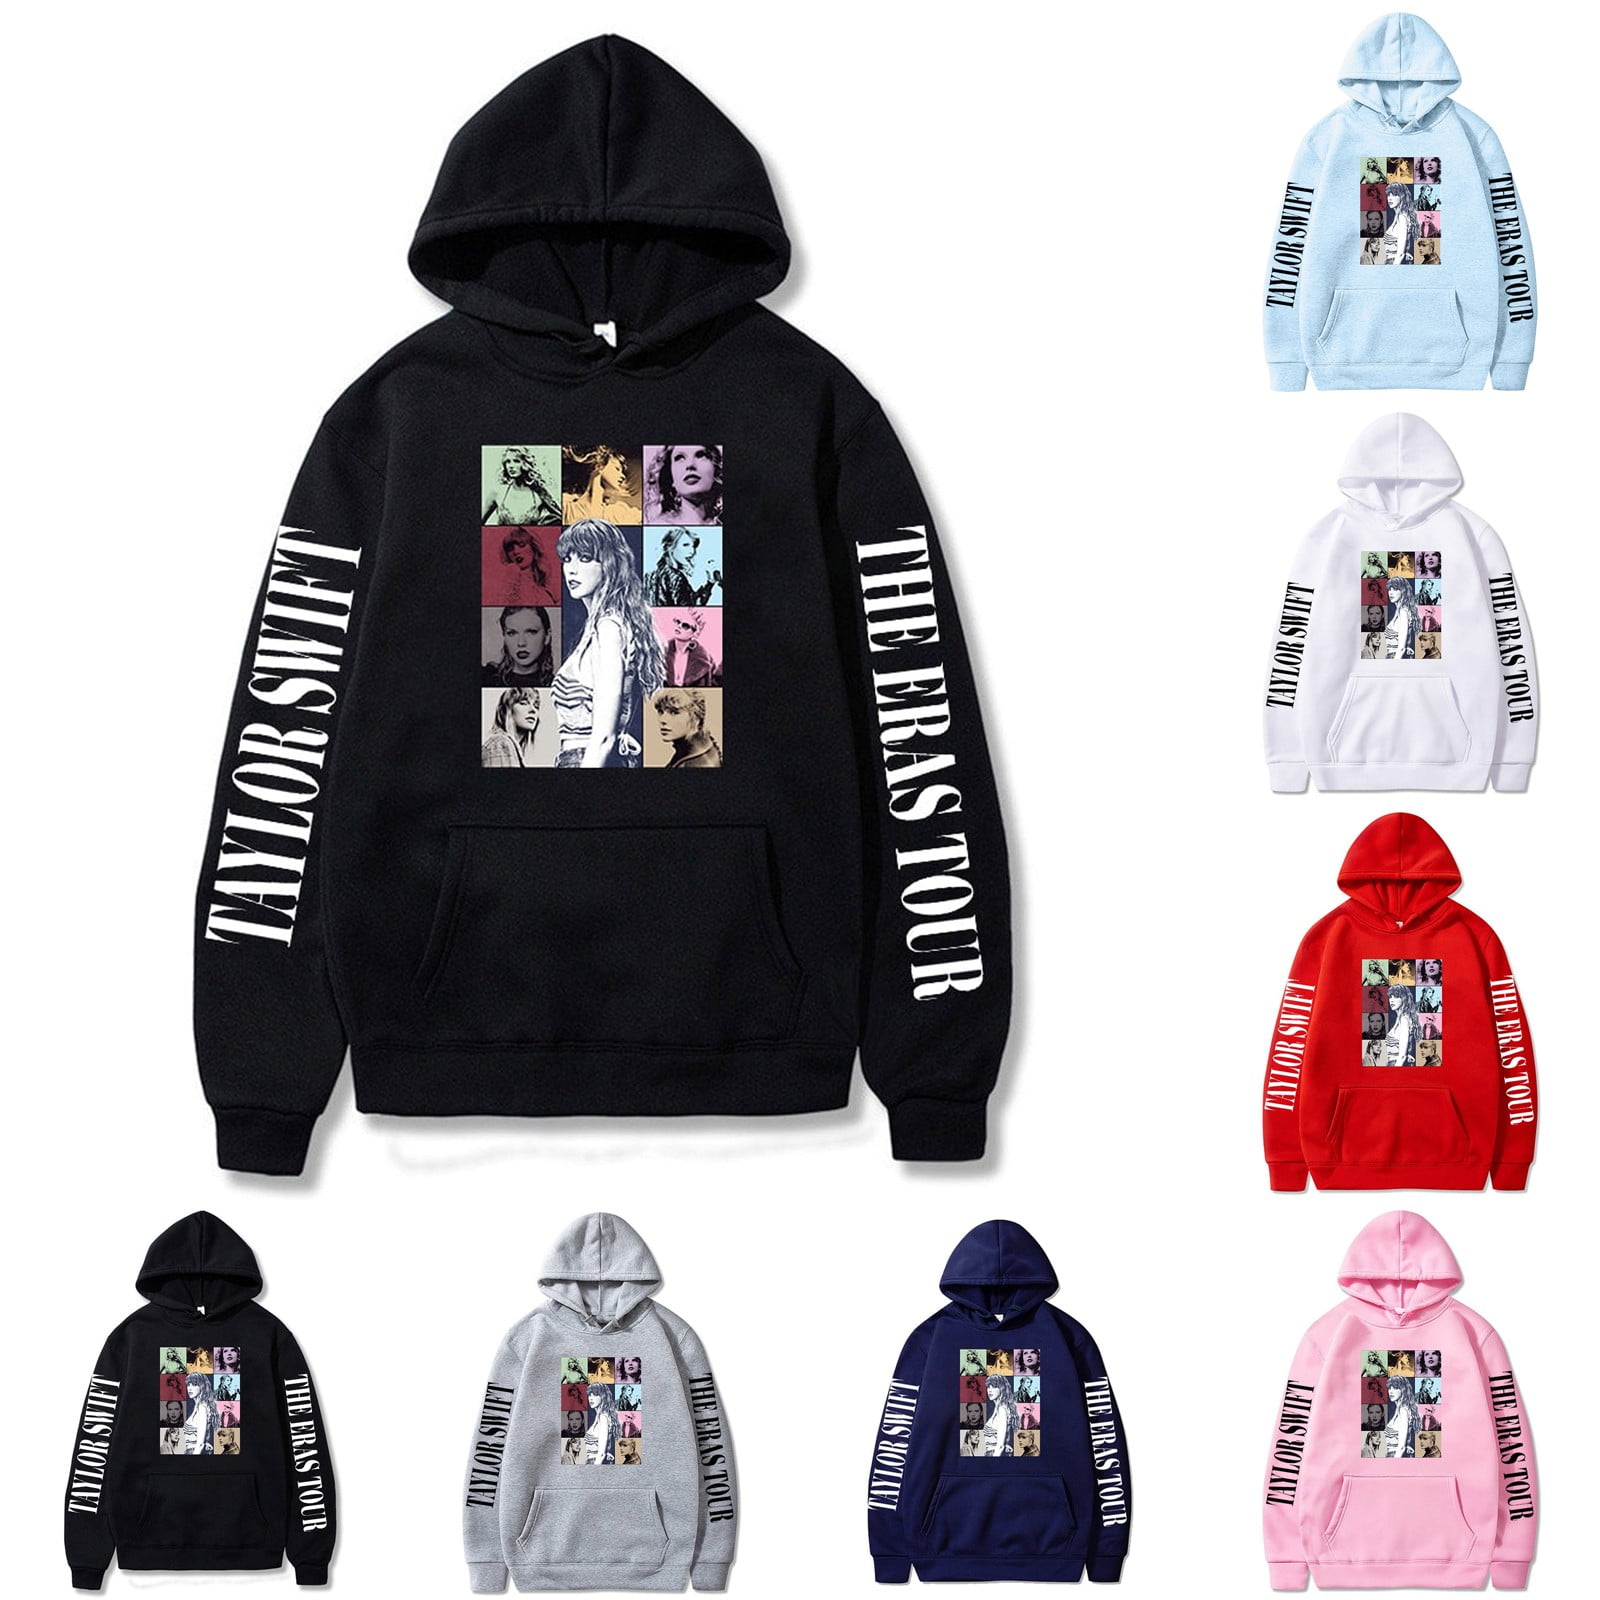 Don't Miss Out! 1989 Taylor Alison Swift Hoodie KUPW Men and Women's ...